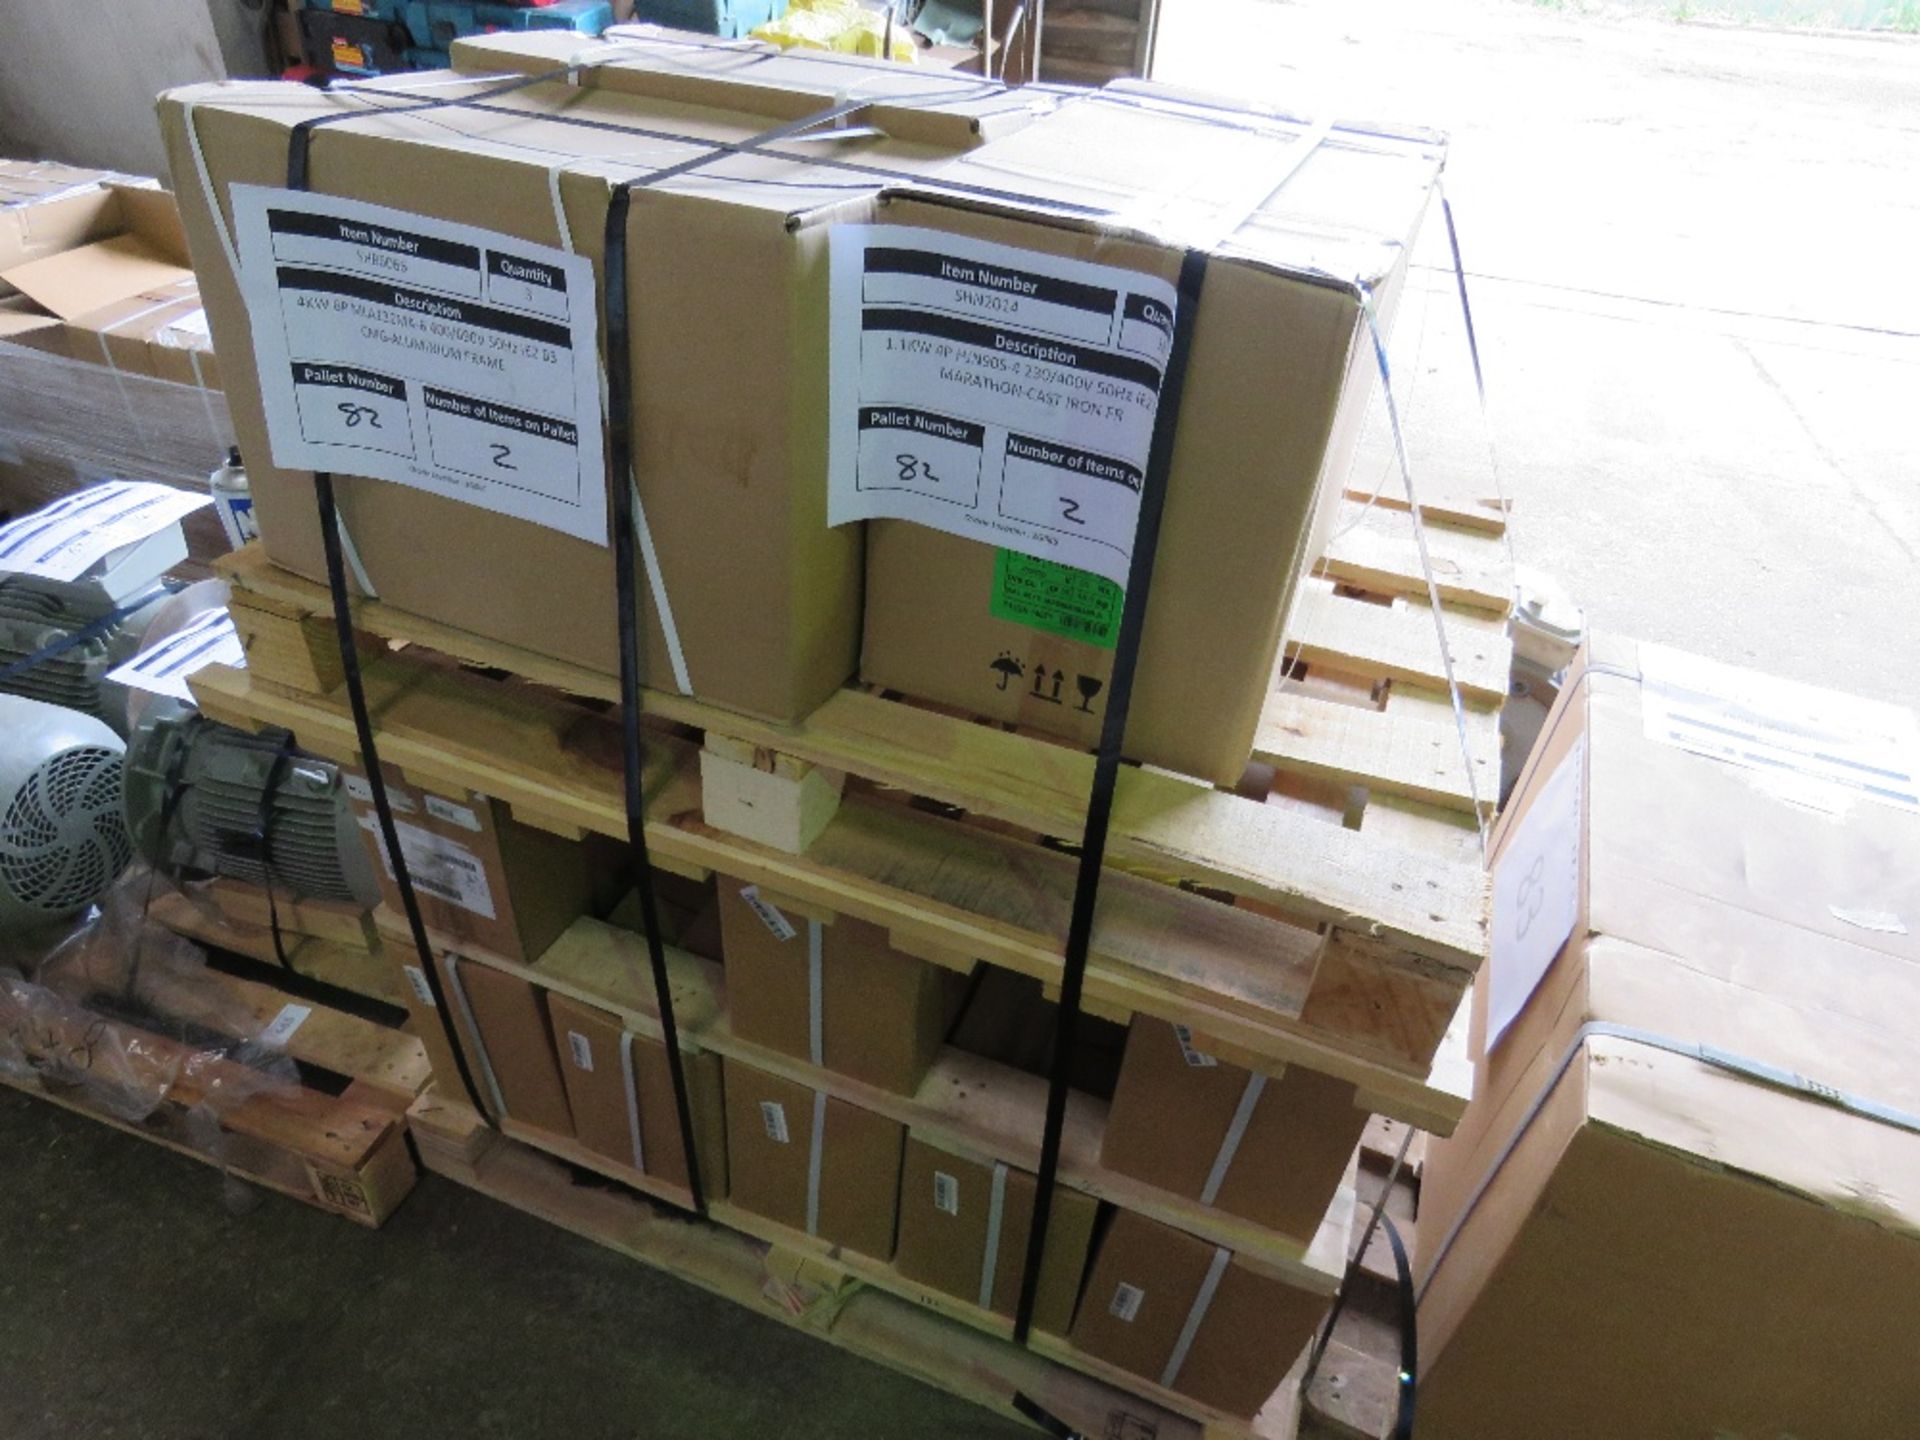 2 PALLETS CONTAINING 21 X ELECTRIC MOTORS. 18@1.1KW PLUS 3@4KW. SOURCED FROM A LARGE MANUFACTURING